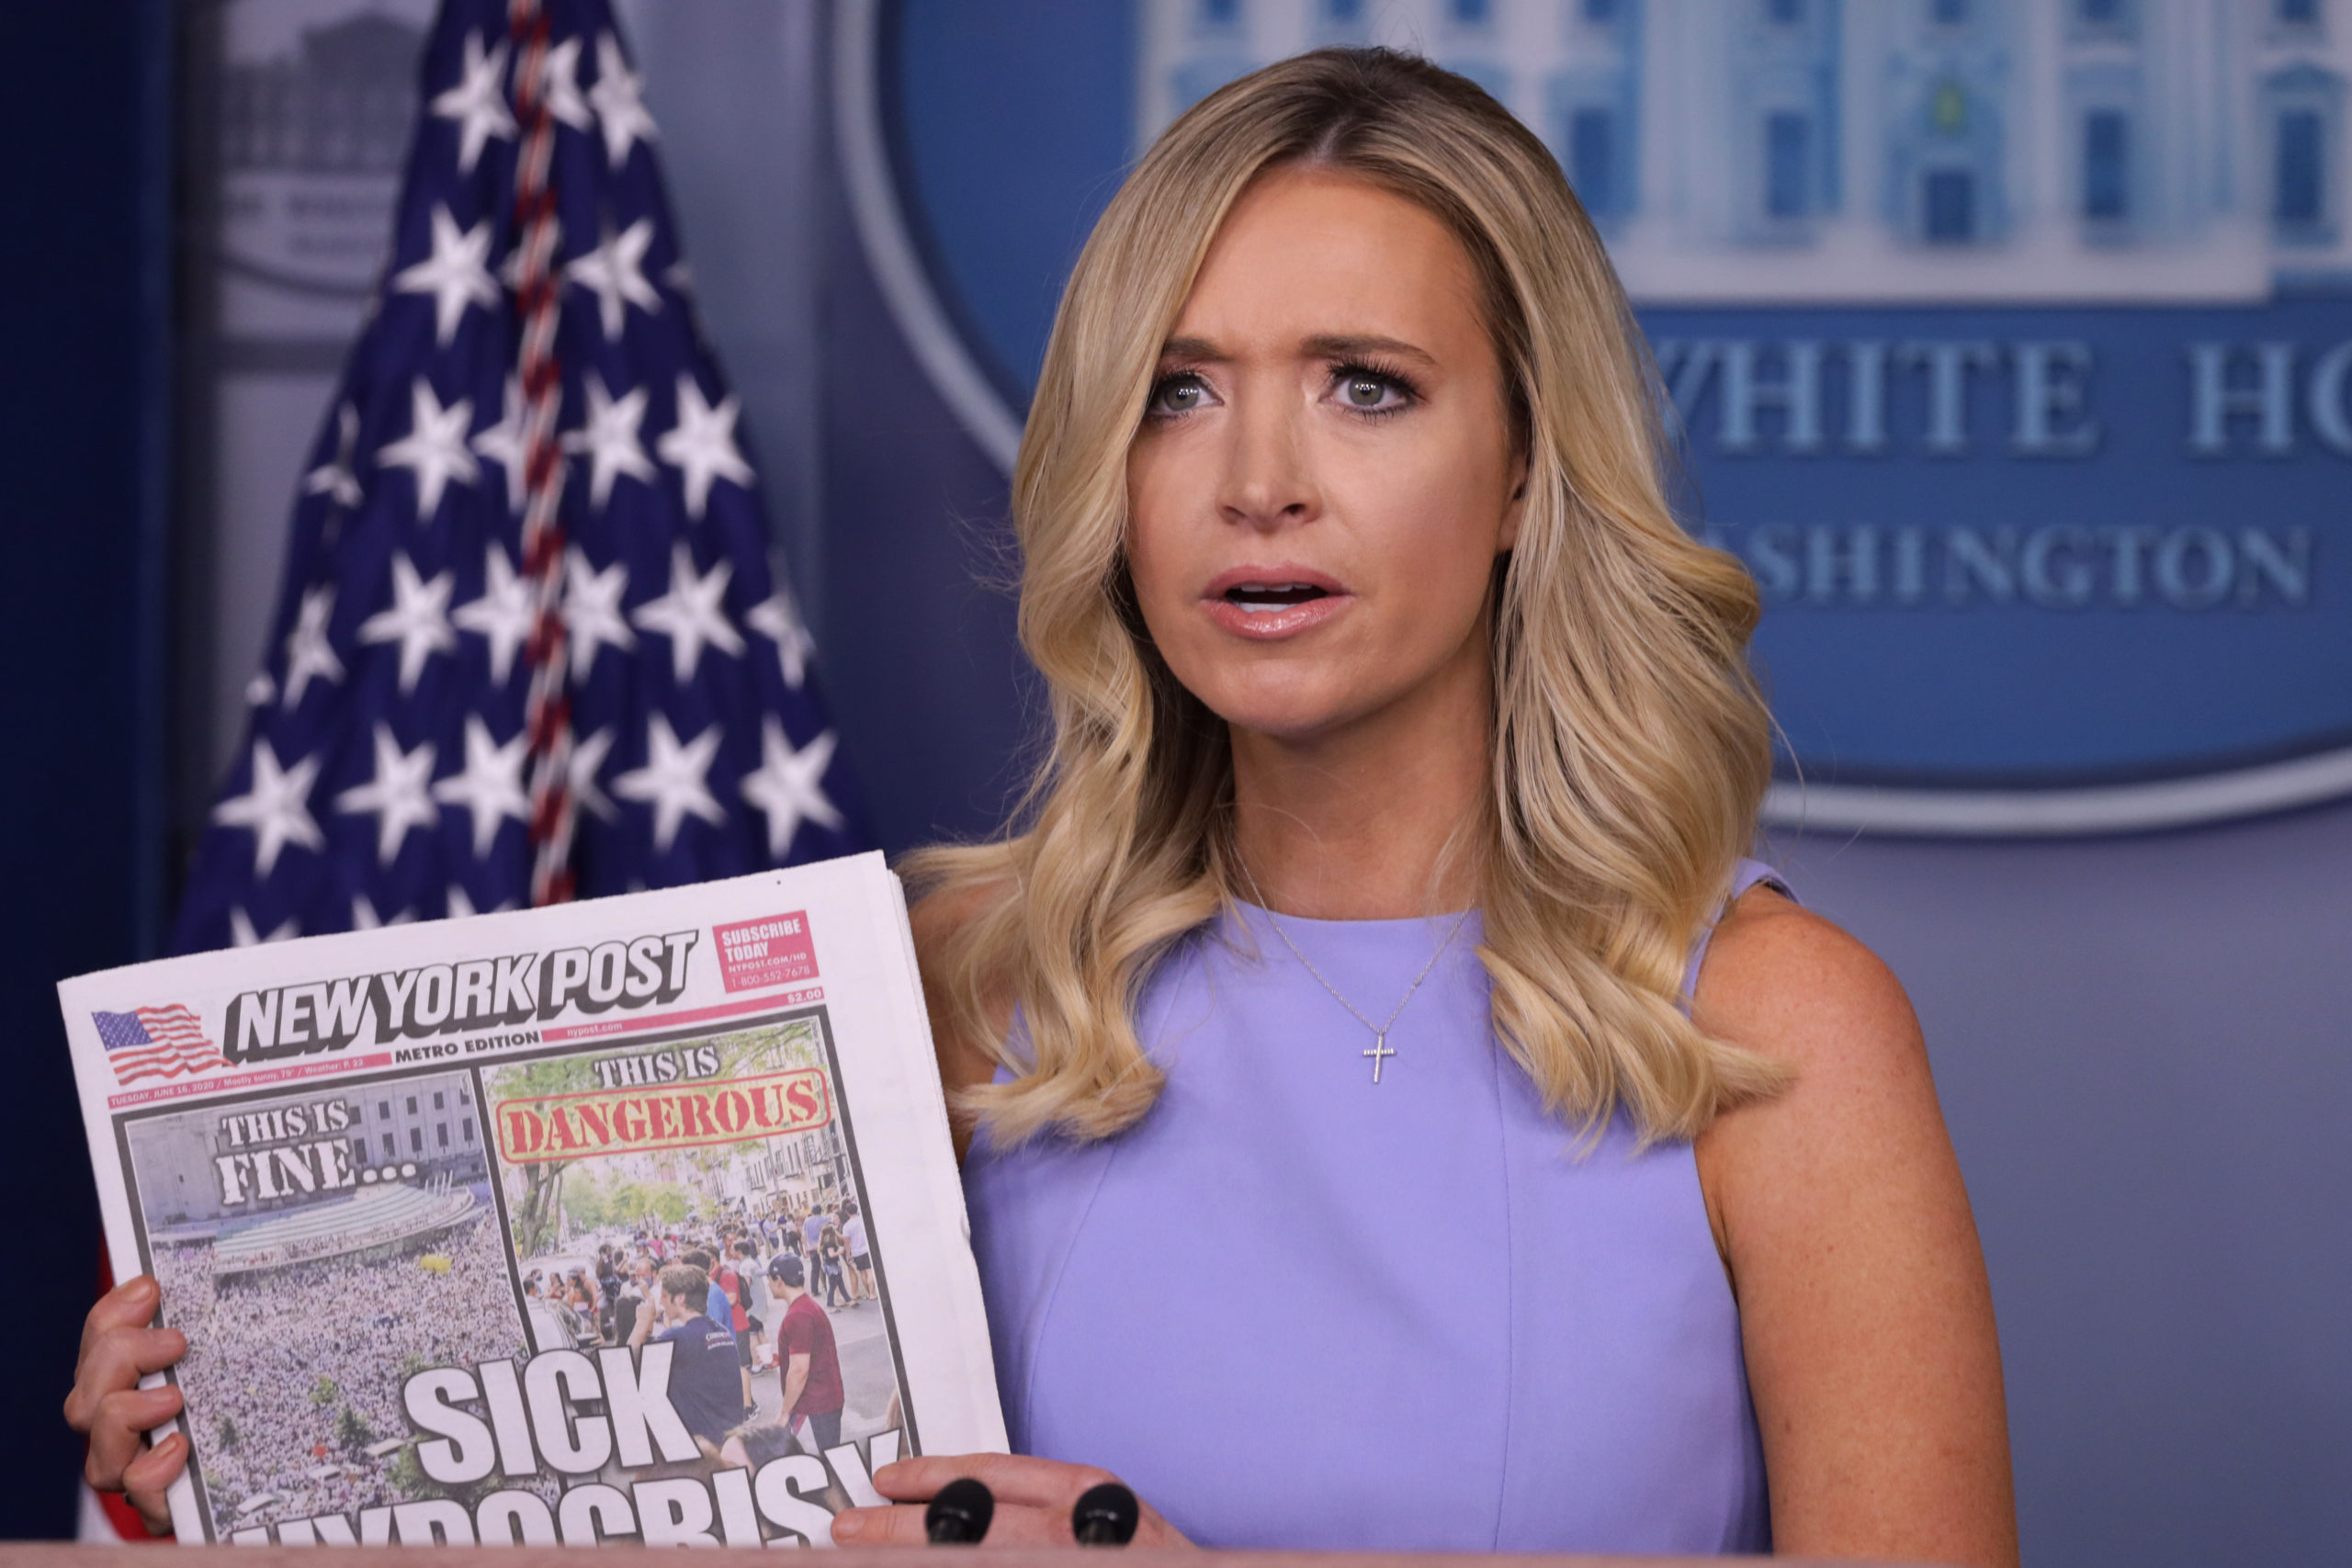 White House Press Secretary Kayleigh McEnany holds up a copy of the New York Post during a news briefing at the James Brady Press Briefing Room of the White House June 17, 2020 in Washington, DC. (Alex Wong/Getty Images)